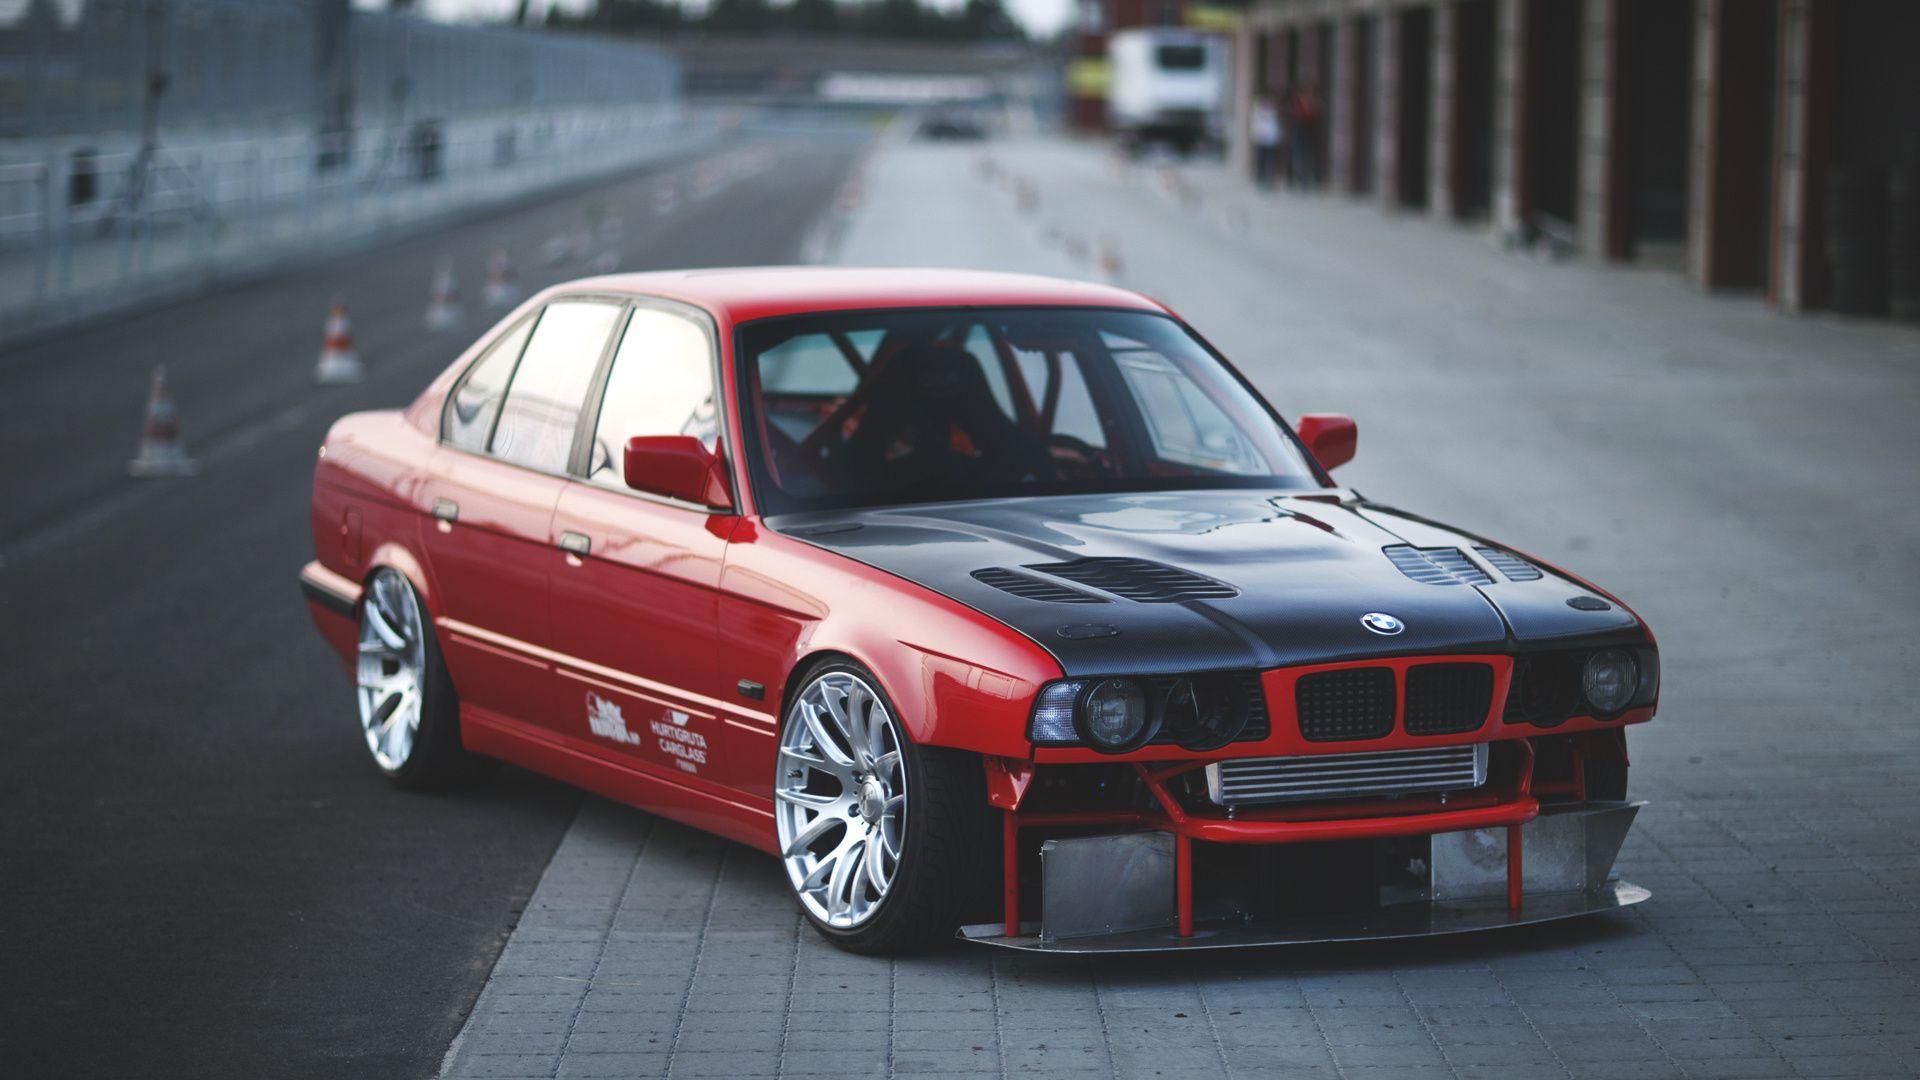 Download Wallpaper 1920x1080 Bmw, E Red, Cars, Side view